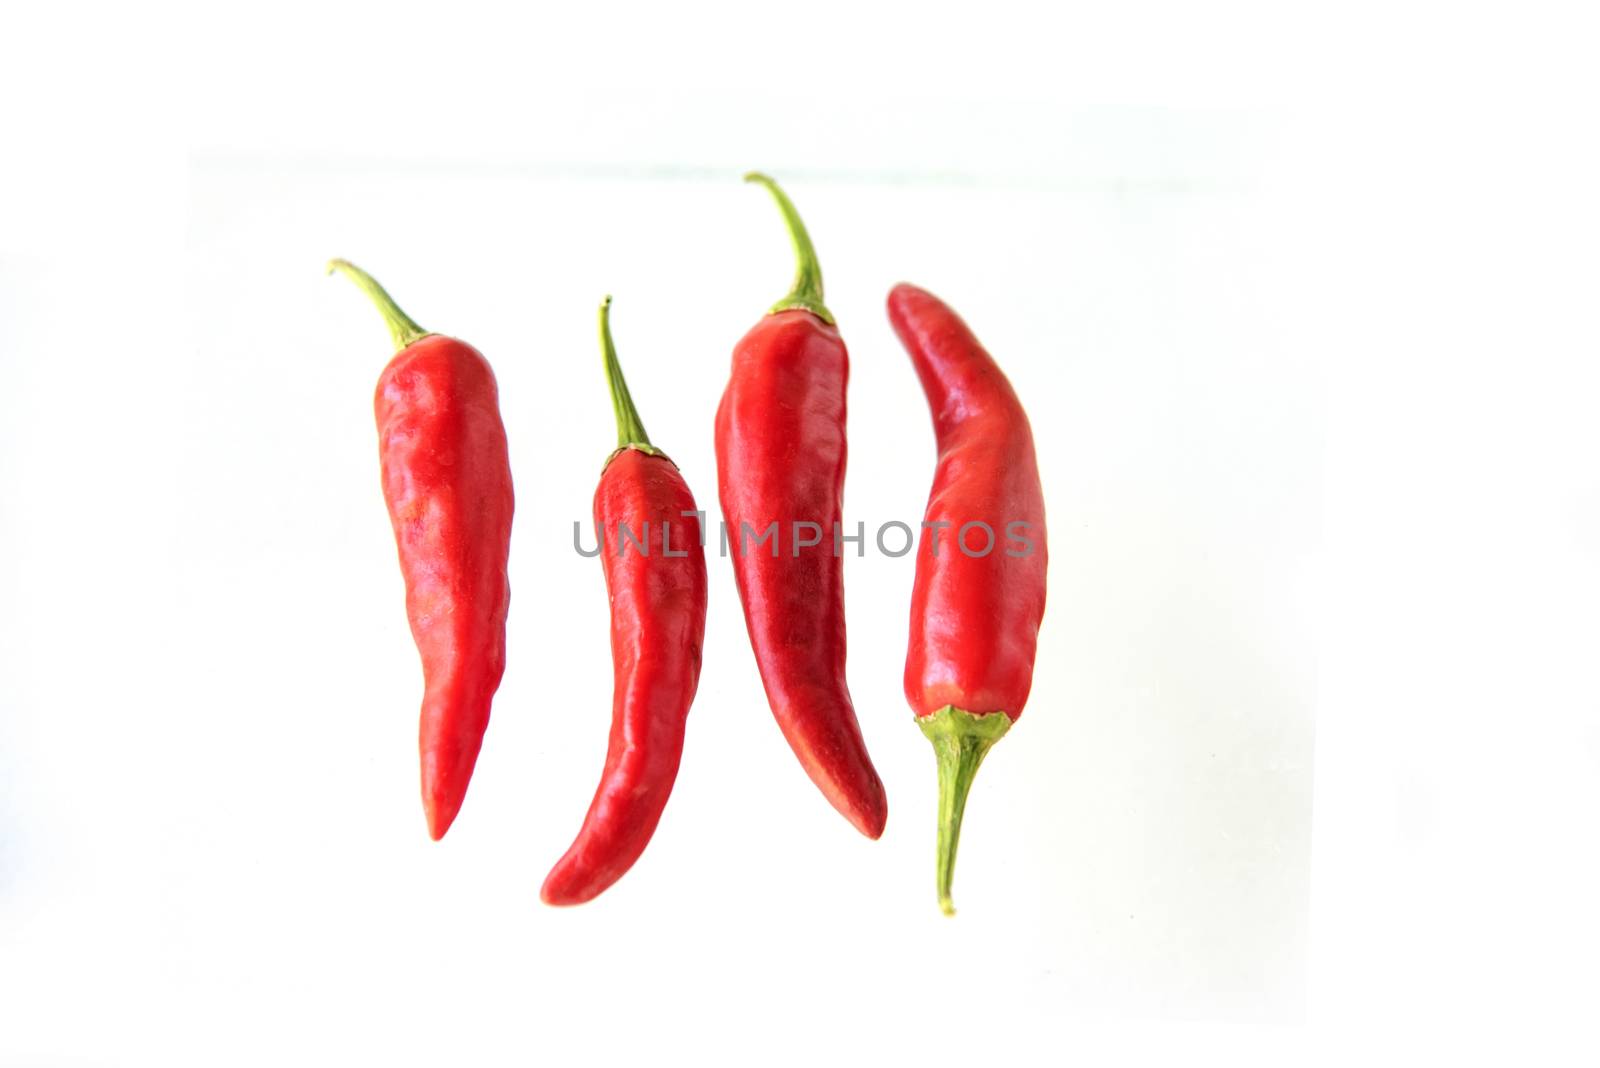 The red Chili pepper isolated